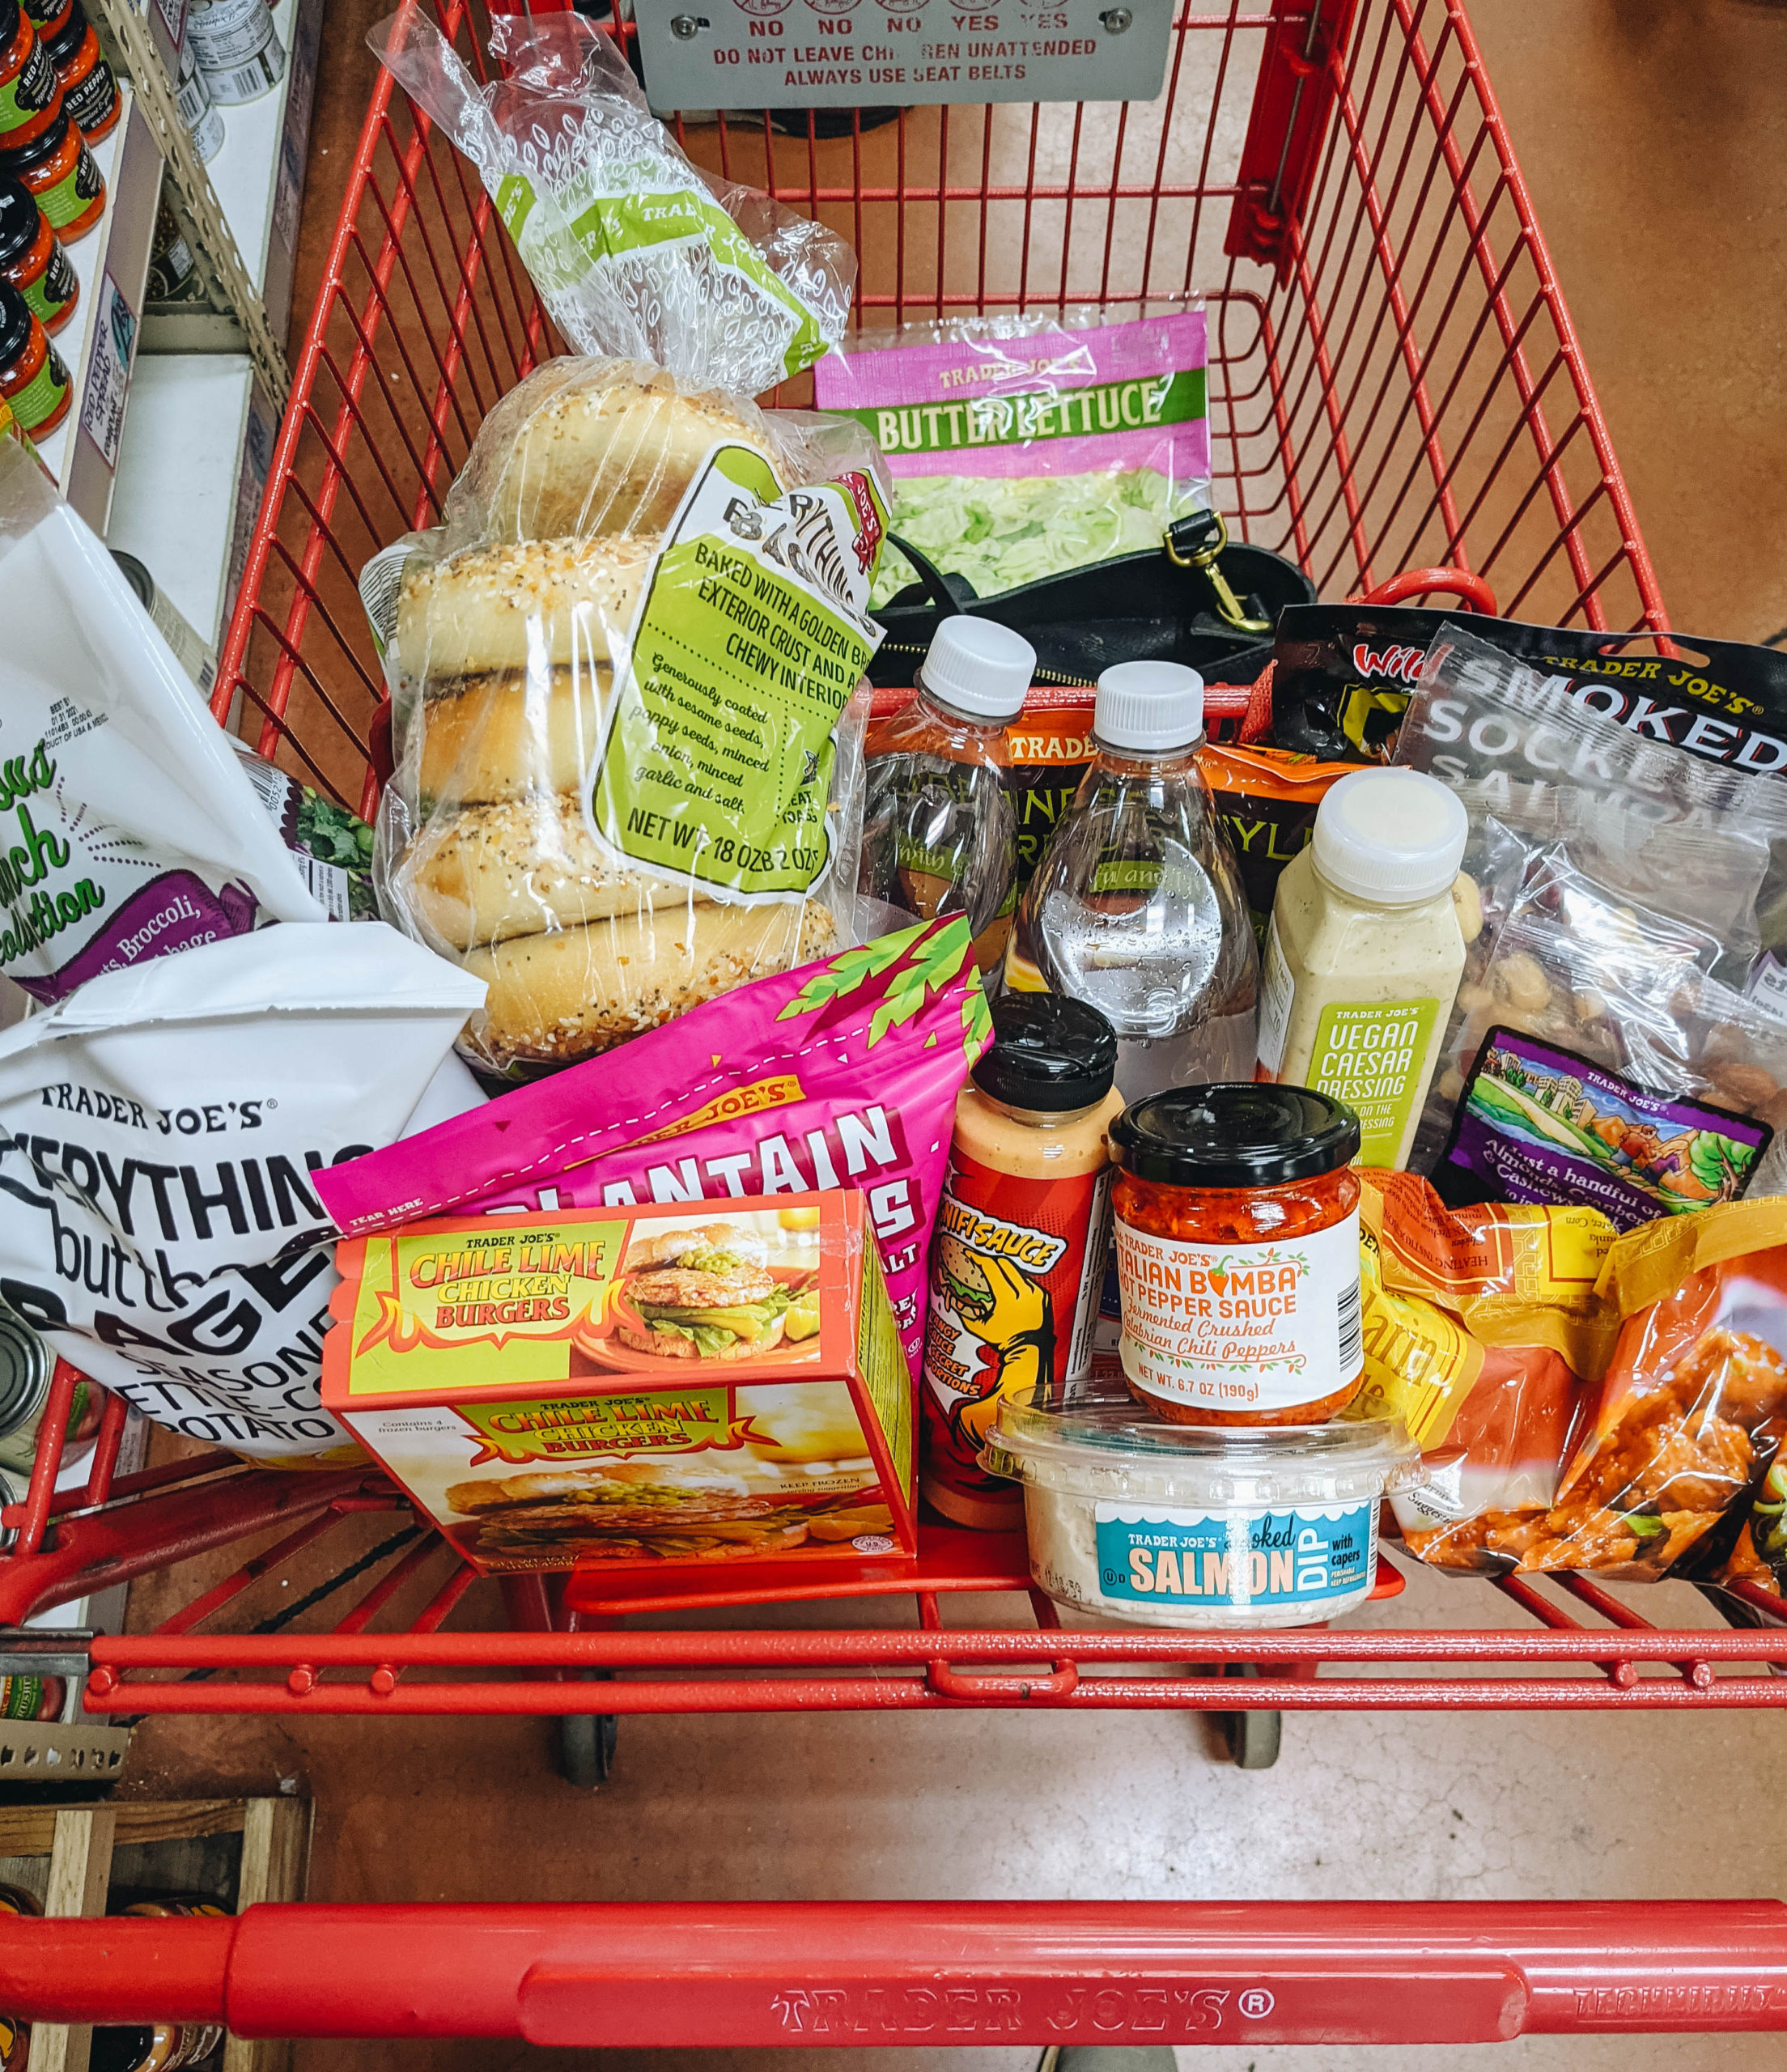 5 Items I Tried from Trader Joe's this month